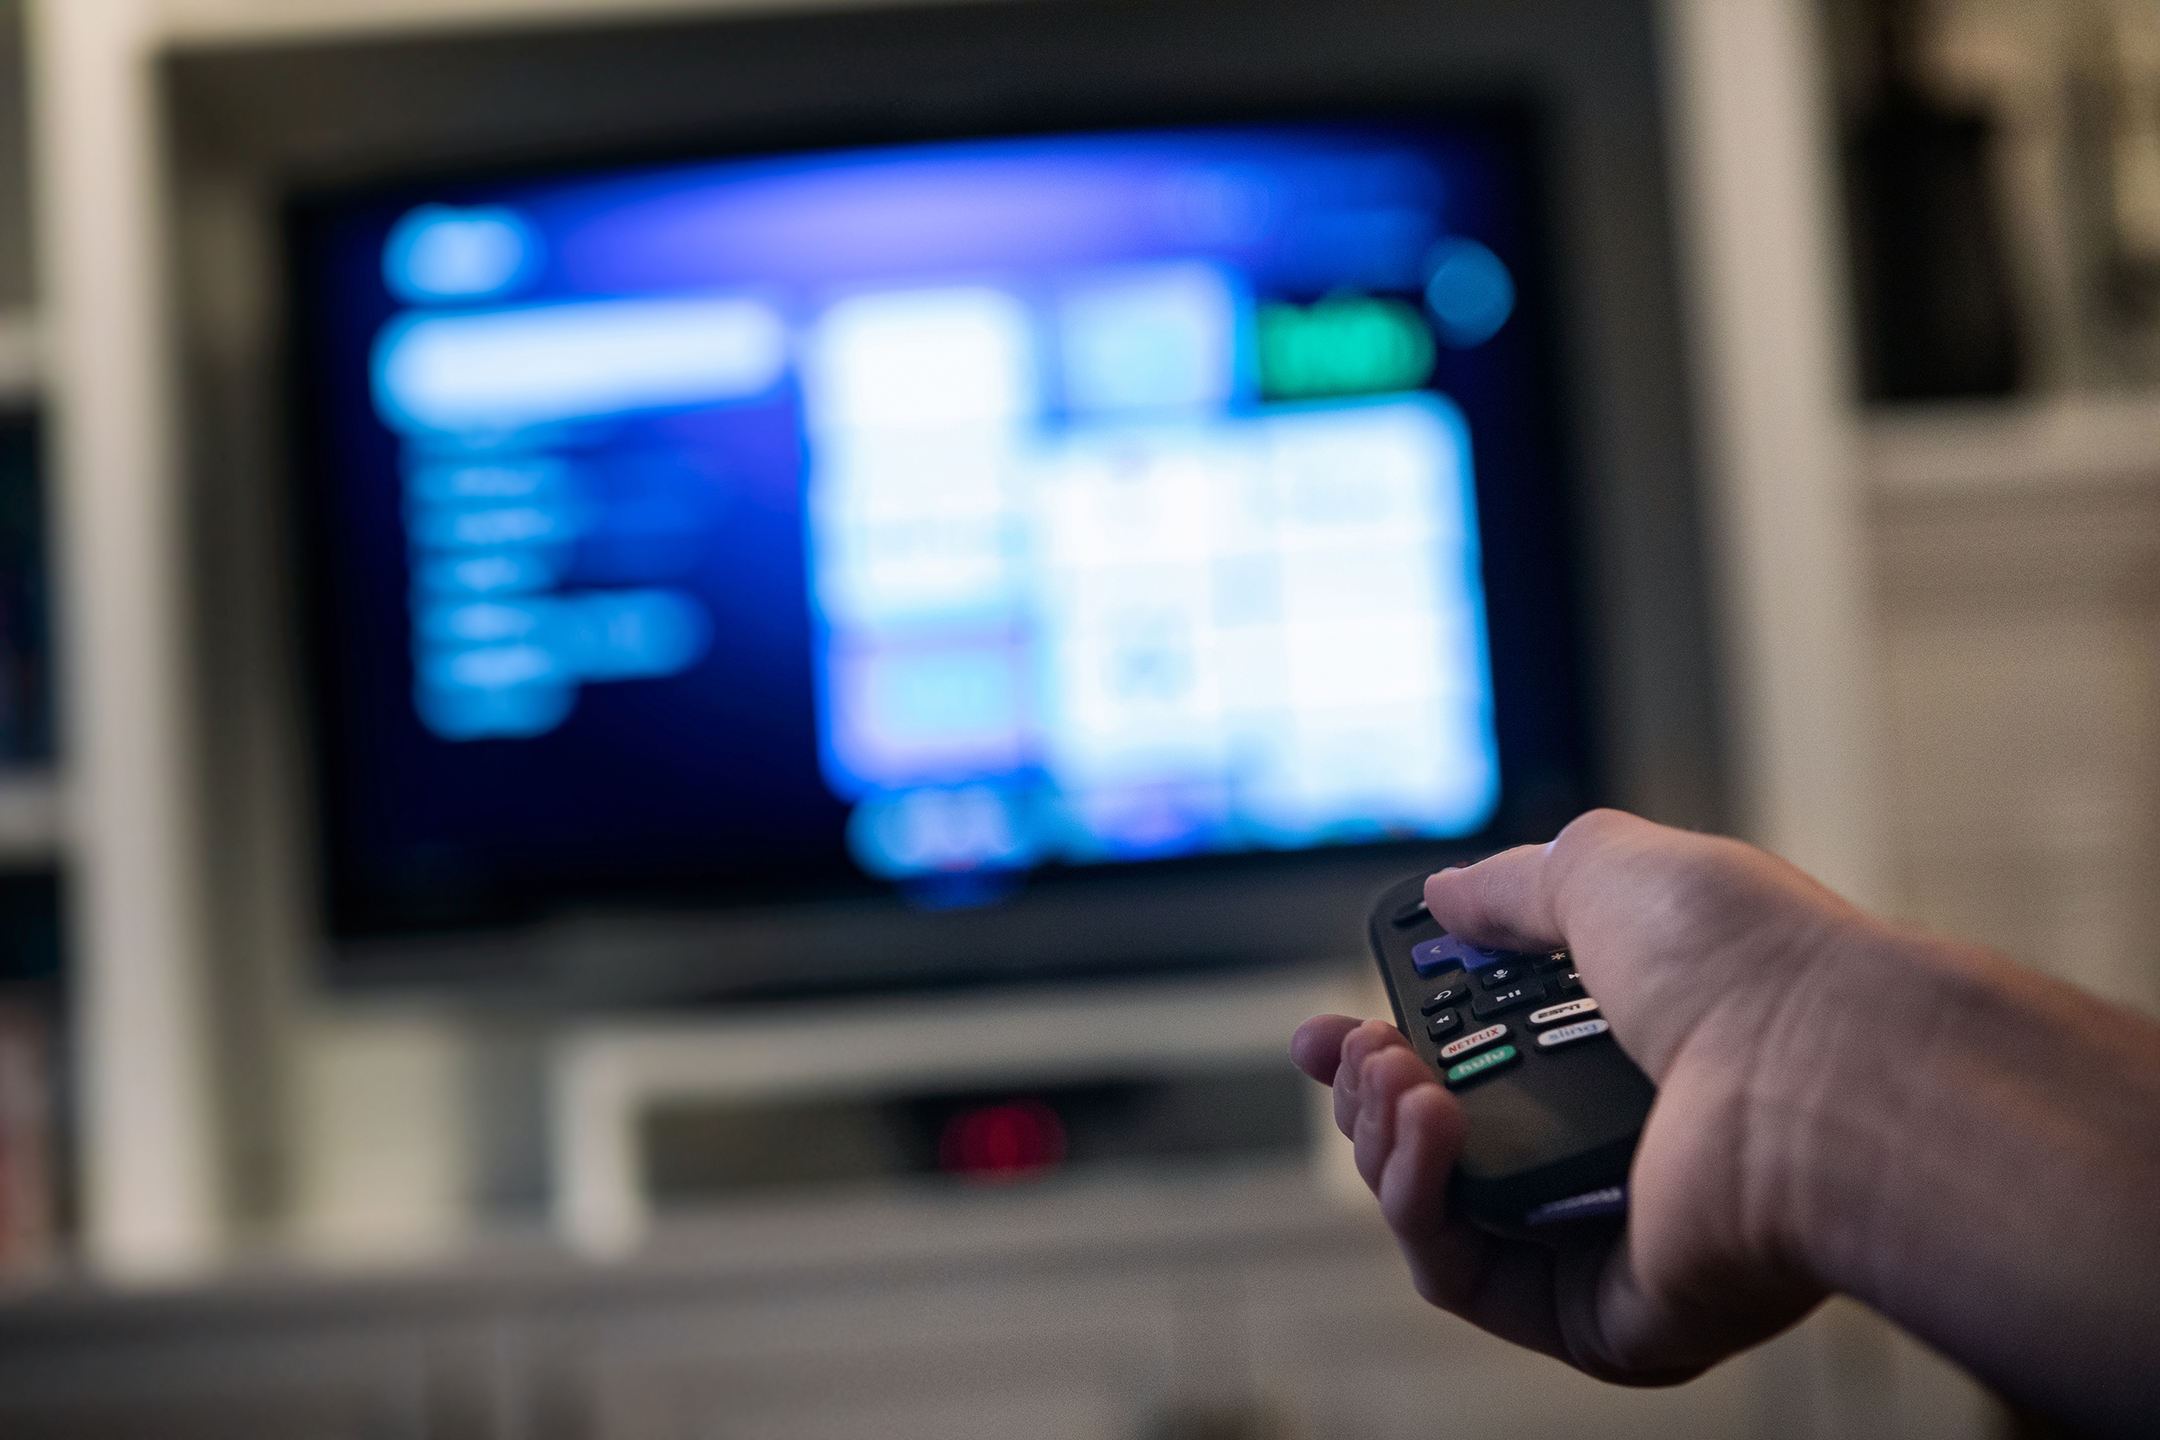 Hand clutching a remote in the foreground, an out-of-focus TV in the background